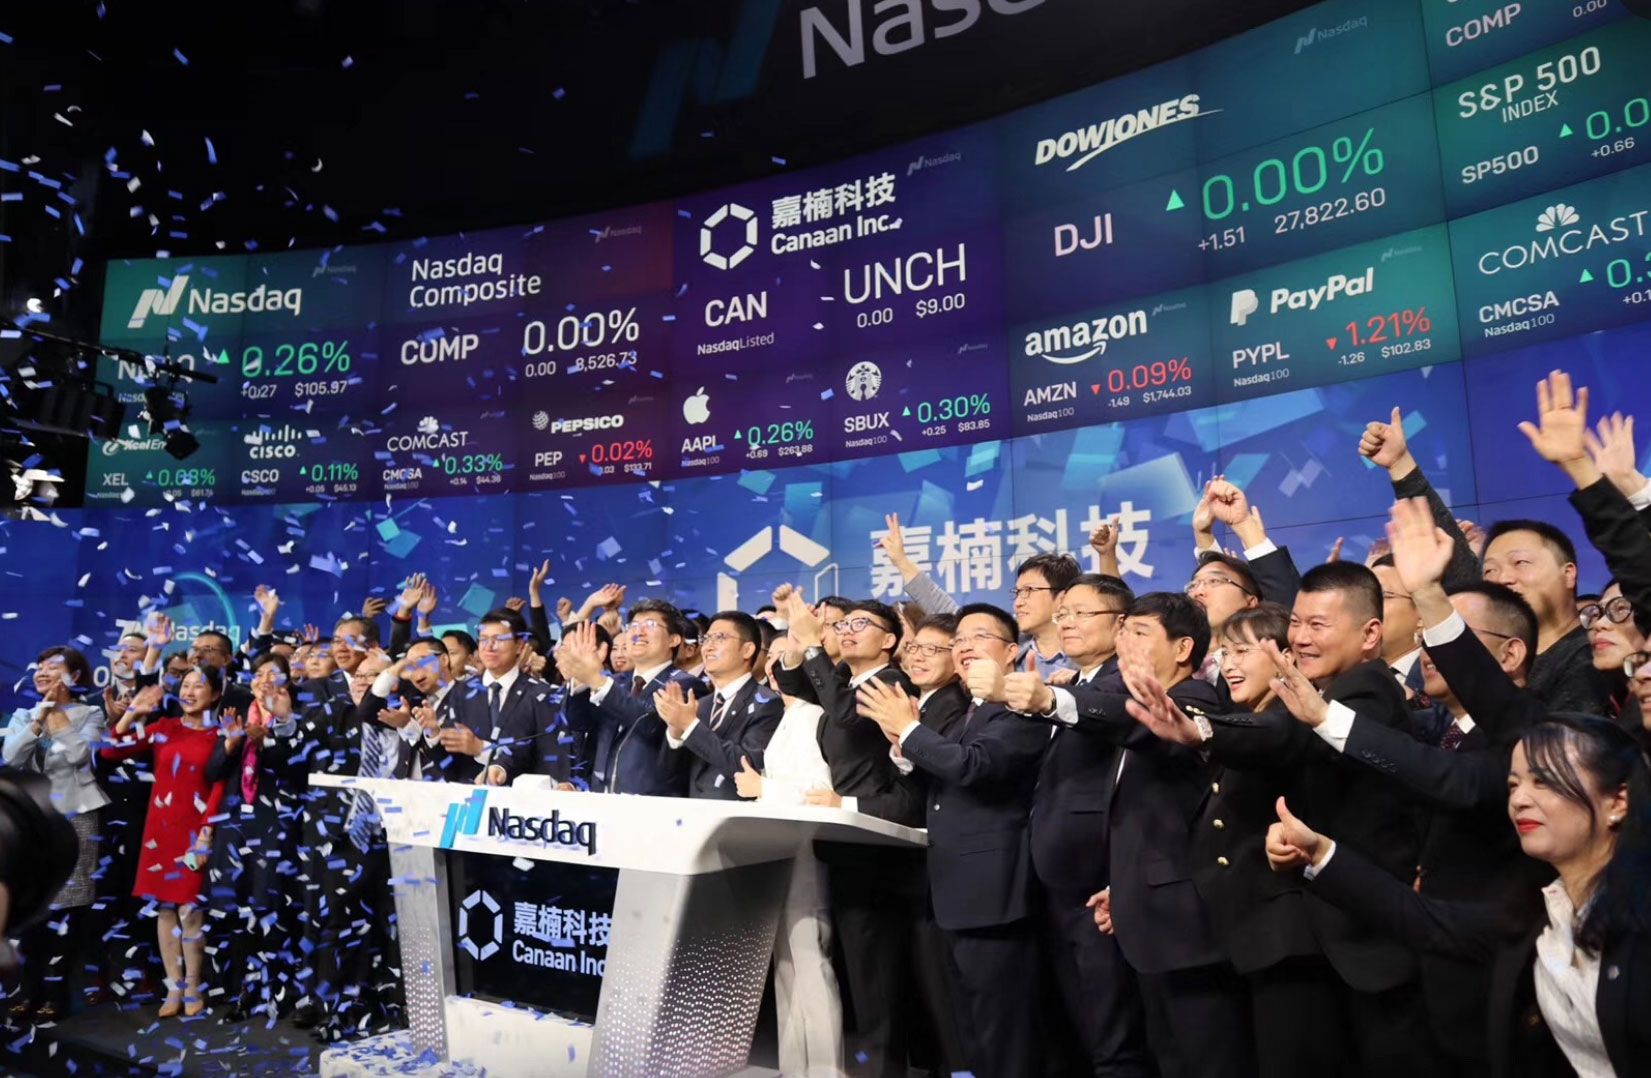 The three elements and three meanings of Jianan Technology's successful IPO